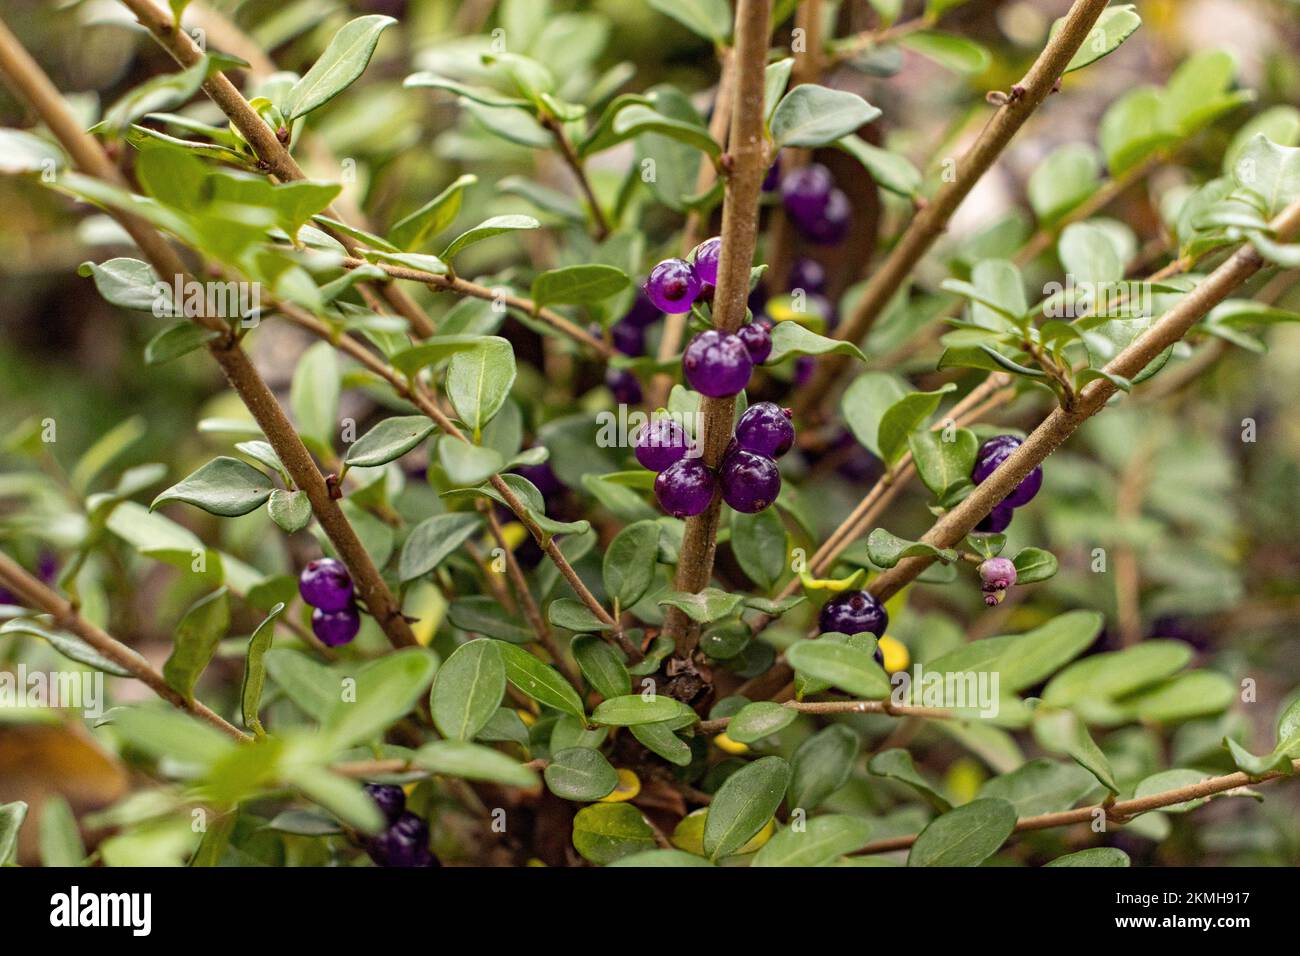 Lonicera pileata with ripe berries in close-up Stock Photo